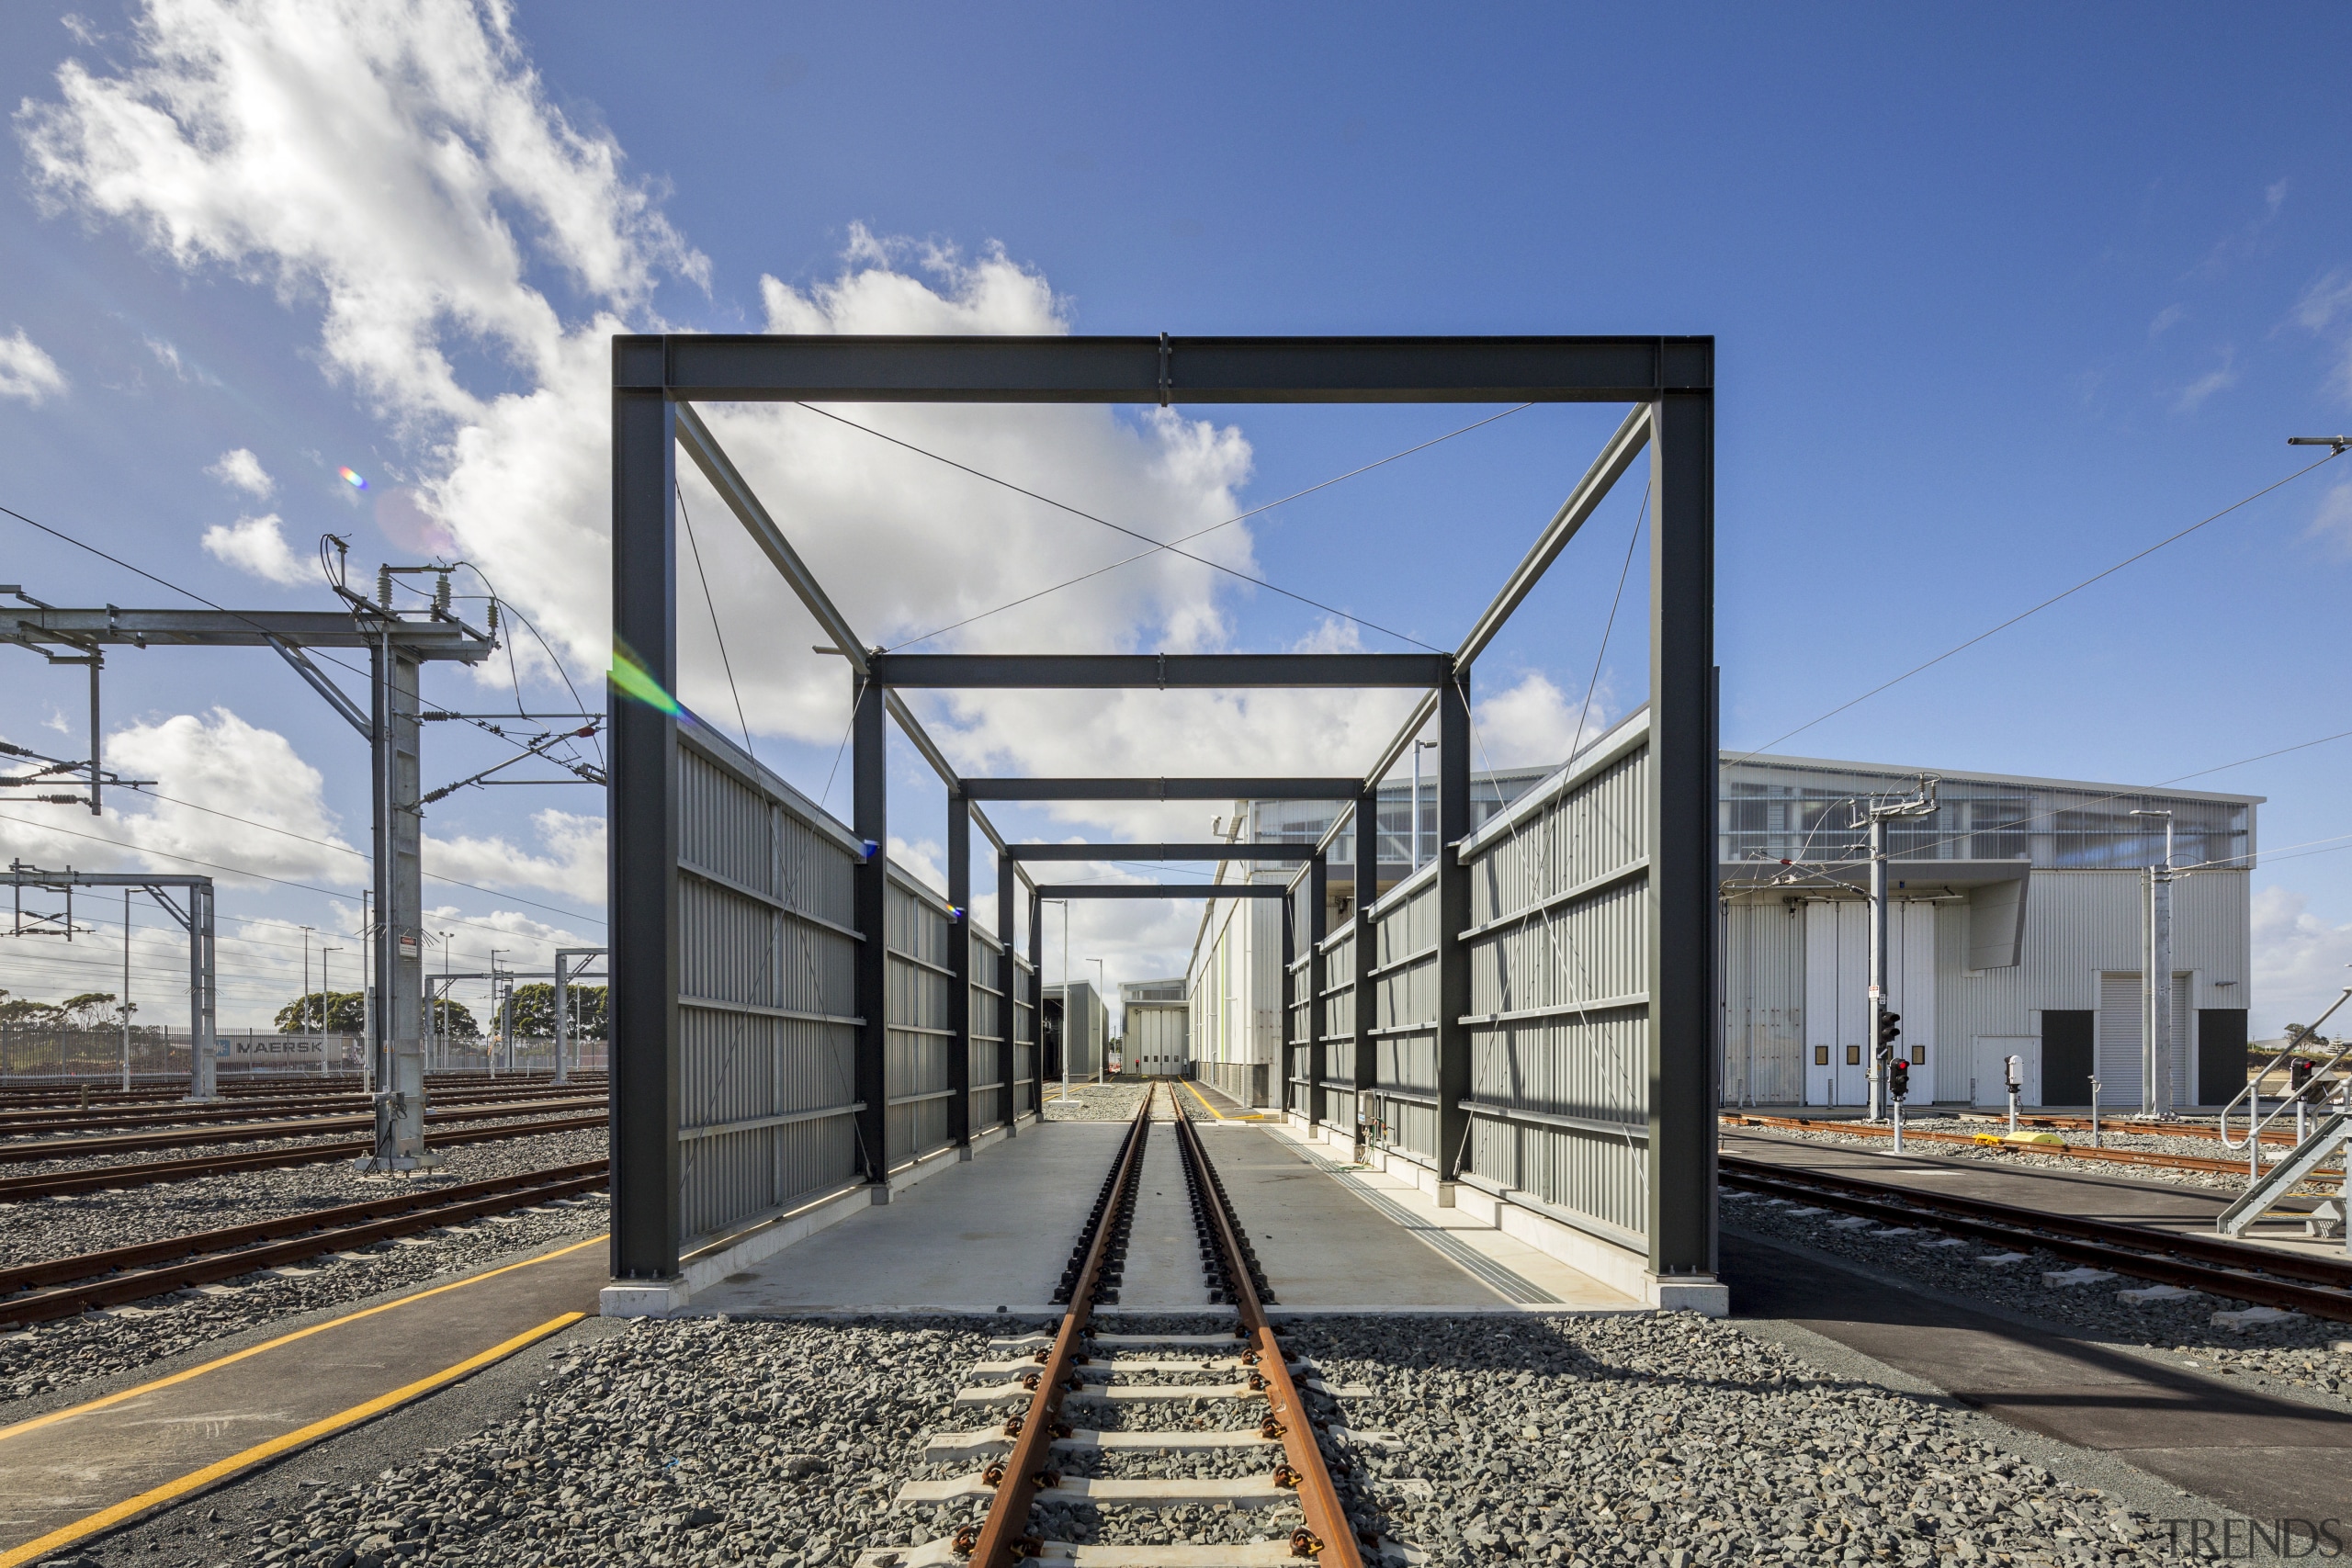 A purpose-built wash platform is one of several architecture, facade, residential area, sky, track, train station, transport, teal, gray